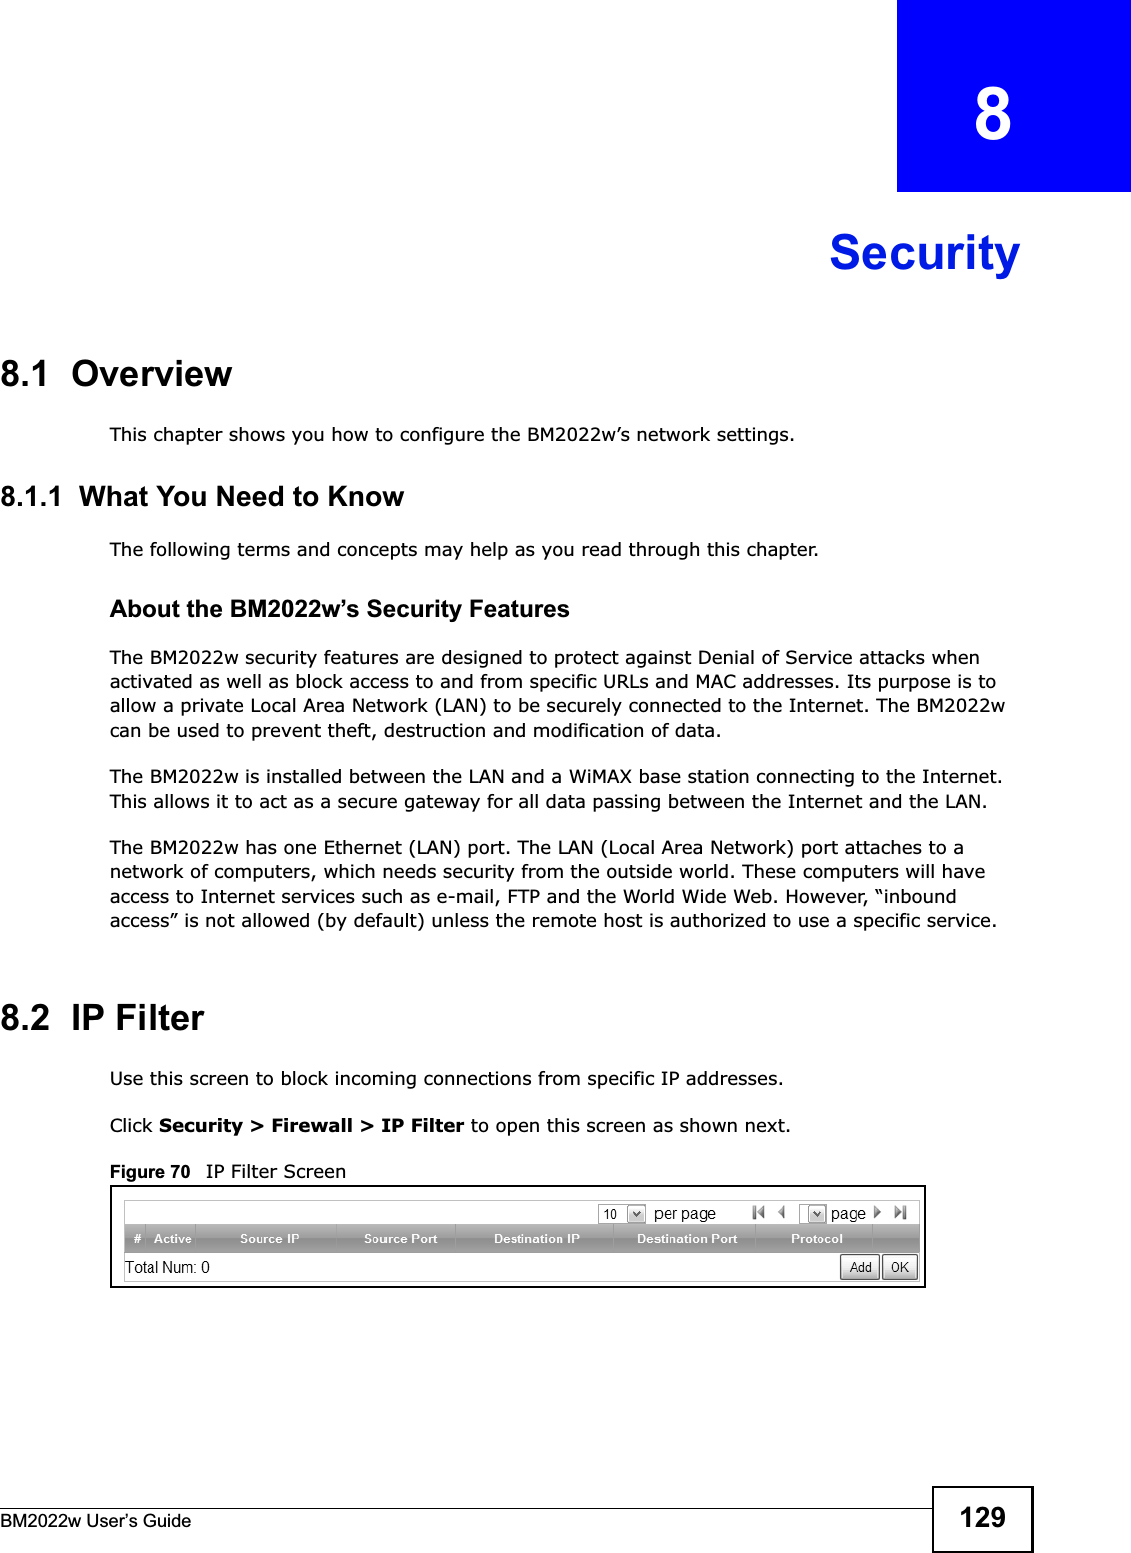 BM2022w User’s Guide 129CHAPTER   8Security8.1  OverviewThis chapter shows you how to configure the BM2022w’s network settings.8.1.1  What You Need to KnowThe following terms and concepts may help as you read through this chapter.About the BM2022w’s Security FeaturesThe BM2022w security features are designed to protect against Denial of Service attacks when activated as well as block access to and from specific URLs and MAC addresses. Its purpose is to allow a private Local Area Network (LAN) to be securely connected to the Internet. The BM2022w can be used to prevent theft, destruction and modification of data. The BM2022w is installed between the LAN and a WiMAX base station connecting to the Internet. This allows it to act as a secure gateway for all data passing between the Internet and the LAN.The BM2022w has one Ethernet (LAN) port. The LAN (Local Area Network) port attaches to a network of computers, which needs security from the outside world. These computers will have access to Internet services such as e-mail, FTP and the World Wide Web. However, “inbound access” is not allowed (by default) unless the remote host is authorized to use a specific service.8.2  IP FilterUse this screen to block incoming connections from specific IP addresses.Click Security &gt; Firewall &gt; IP Filter to open this screen as shown next.Figure 70   IP Filter Screen